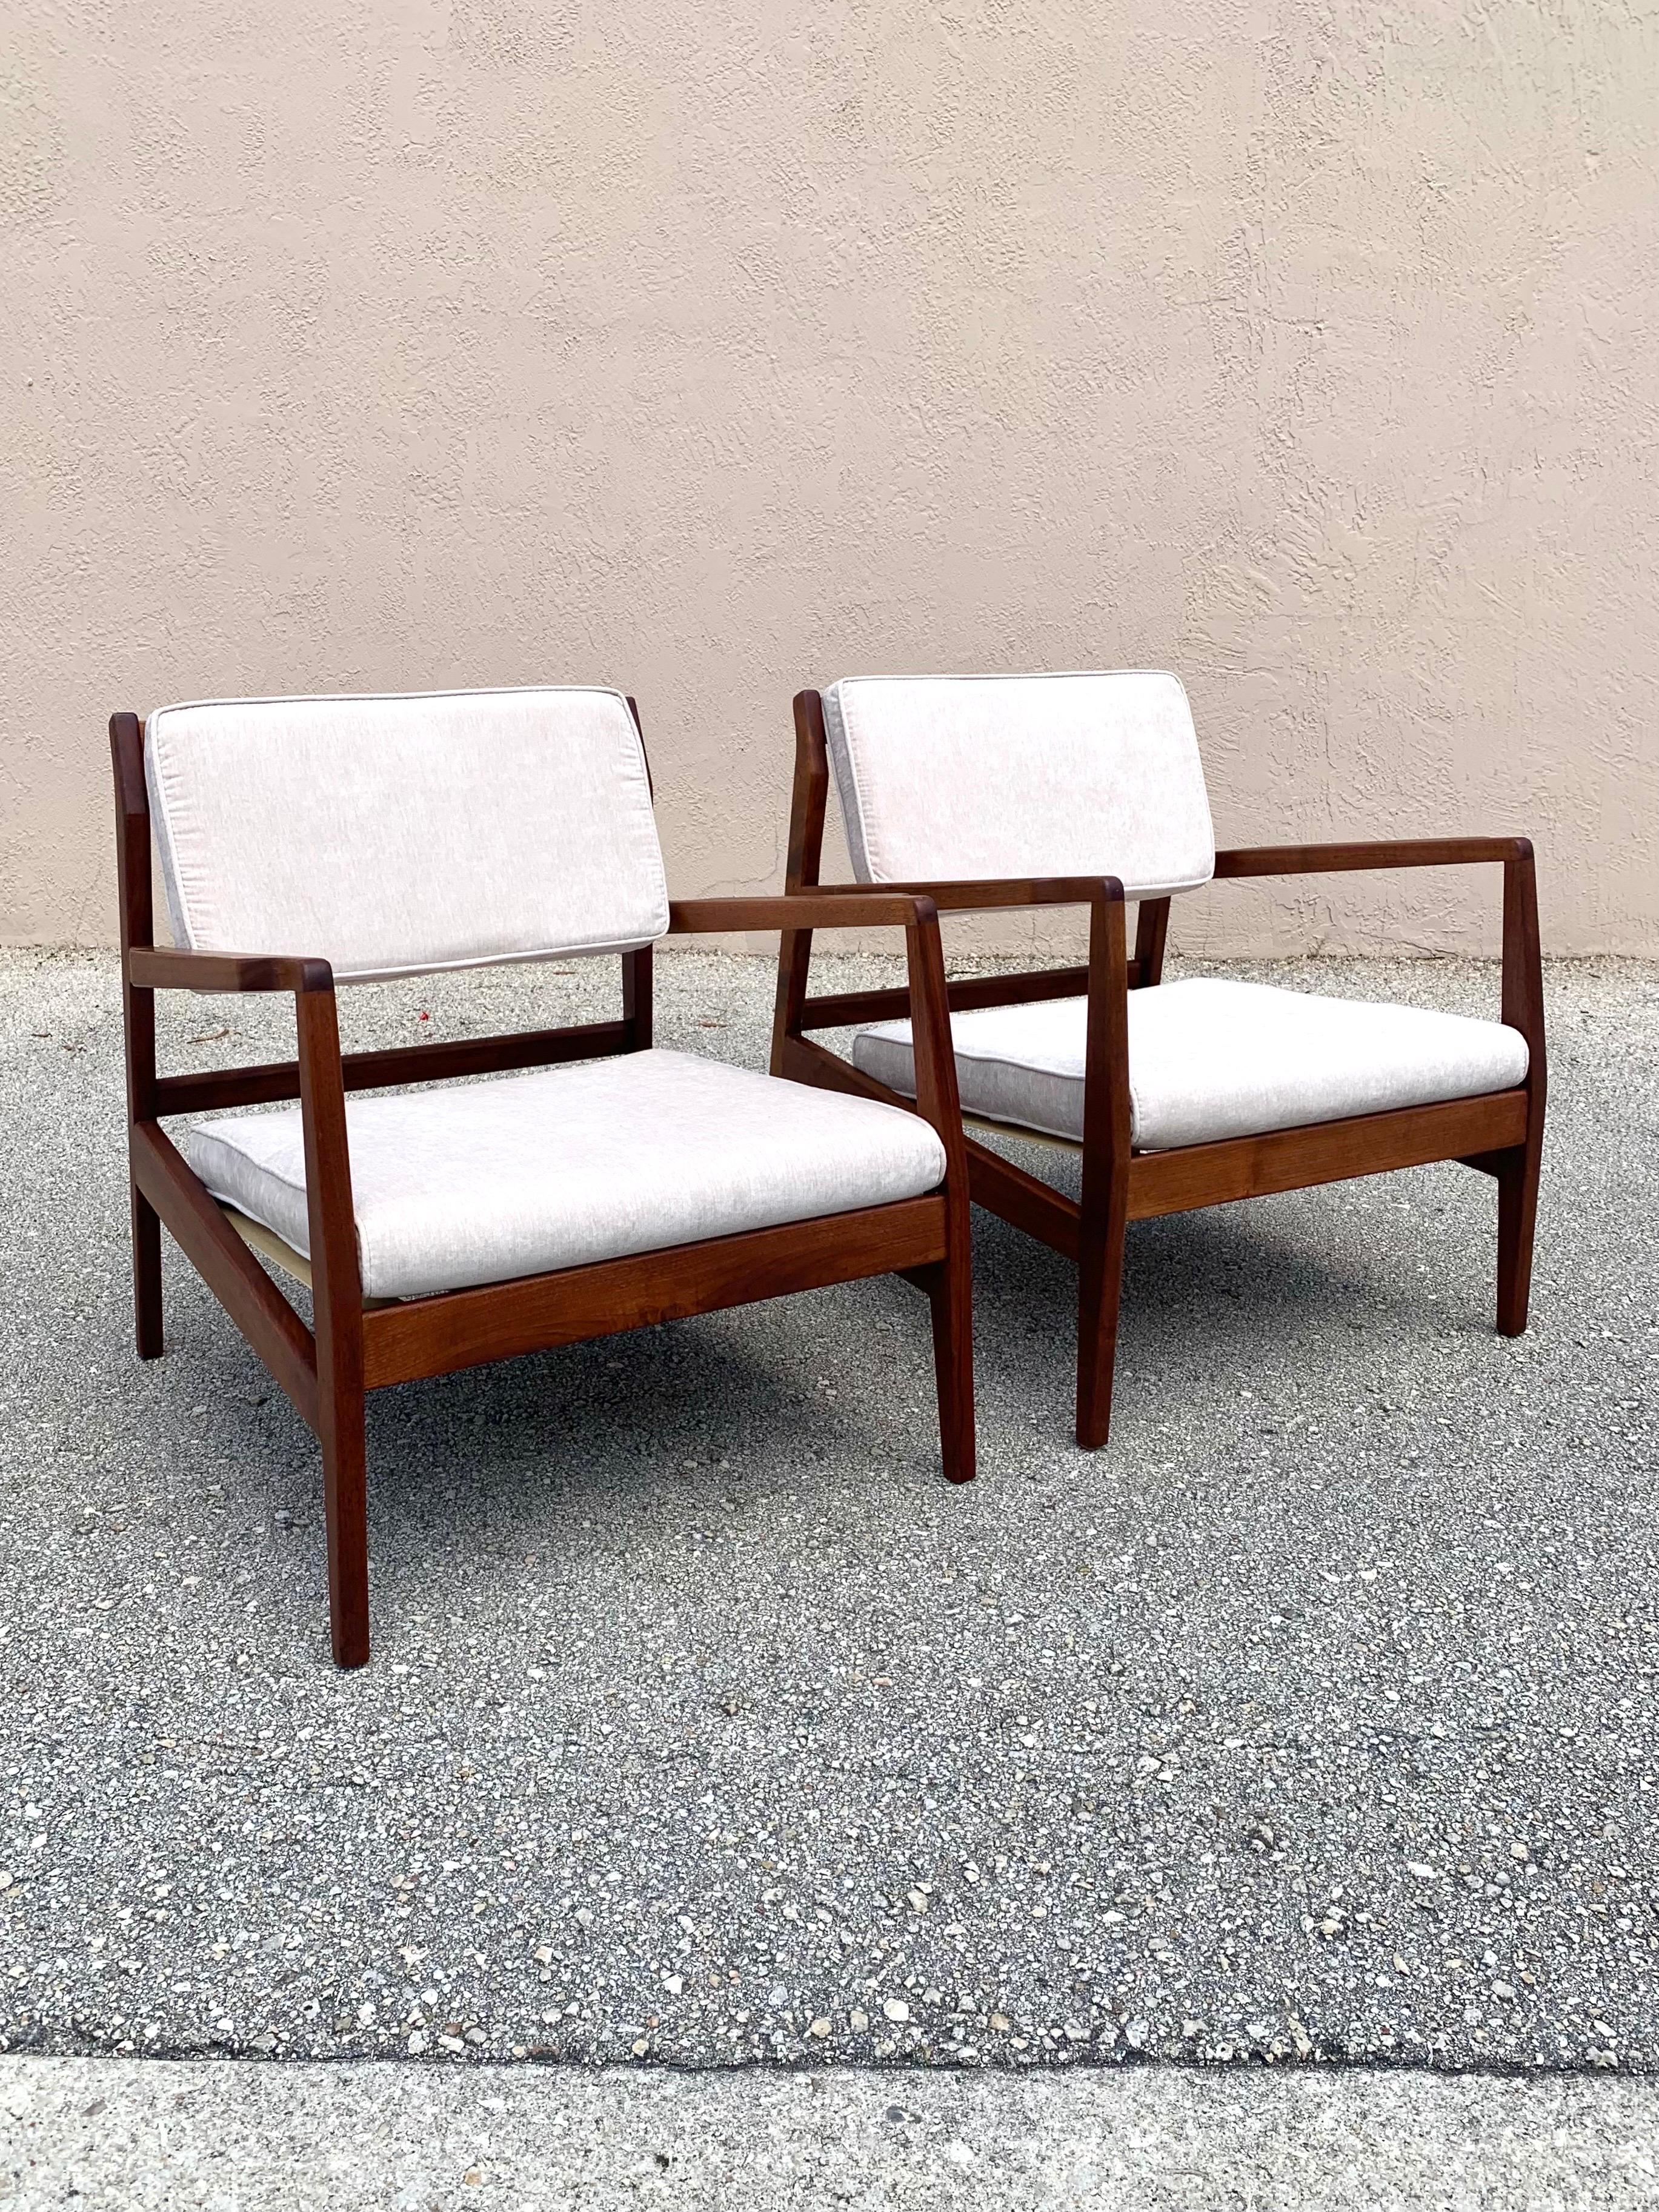 Pair of Jens Risom U 460 lounge chairs. Solid, fully restored, walnut frames and new upholstery and strapping. These chairs are ready to last another 60 years. Very comfortable and make great accent chairs for you and your guests. Upholstery is